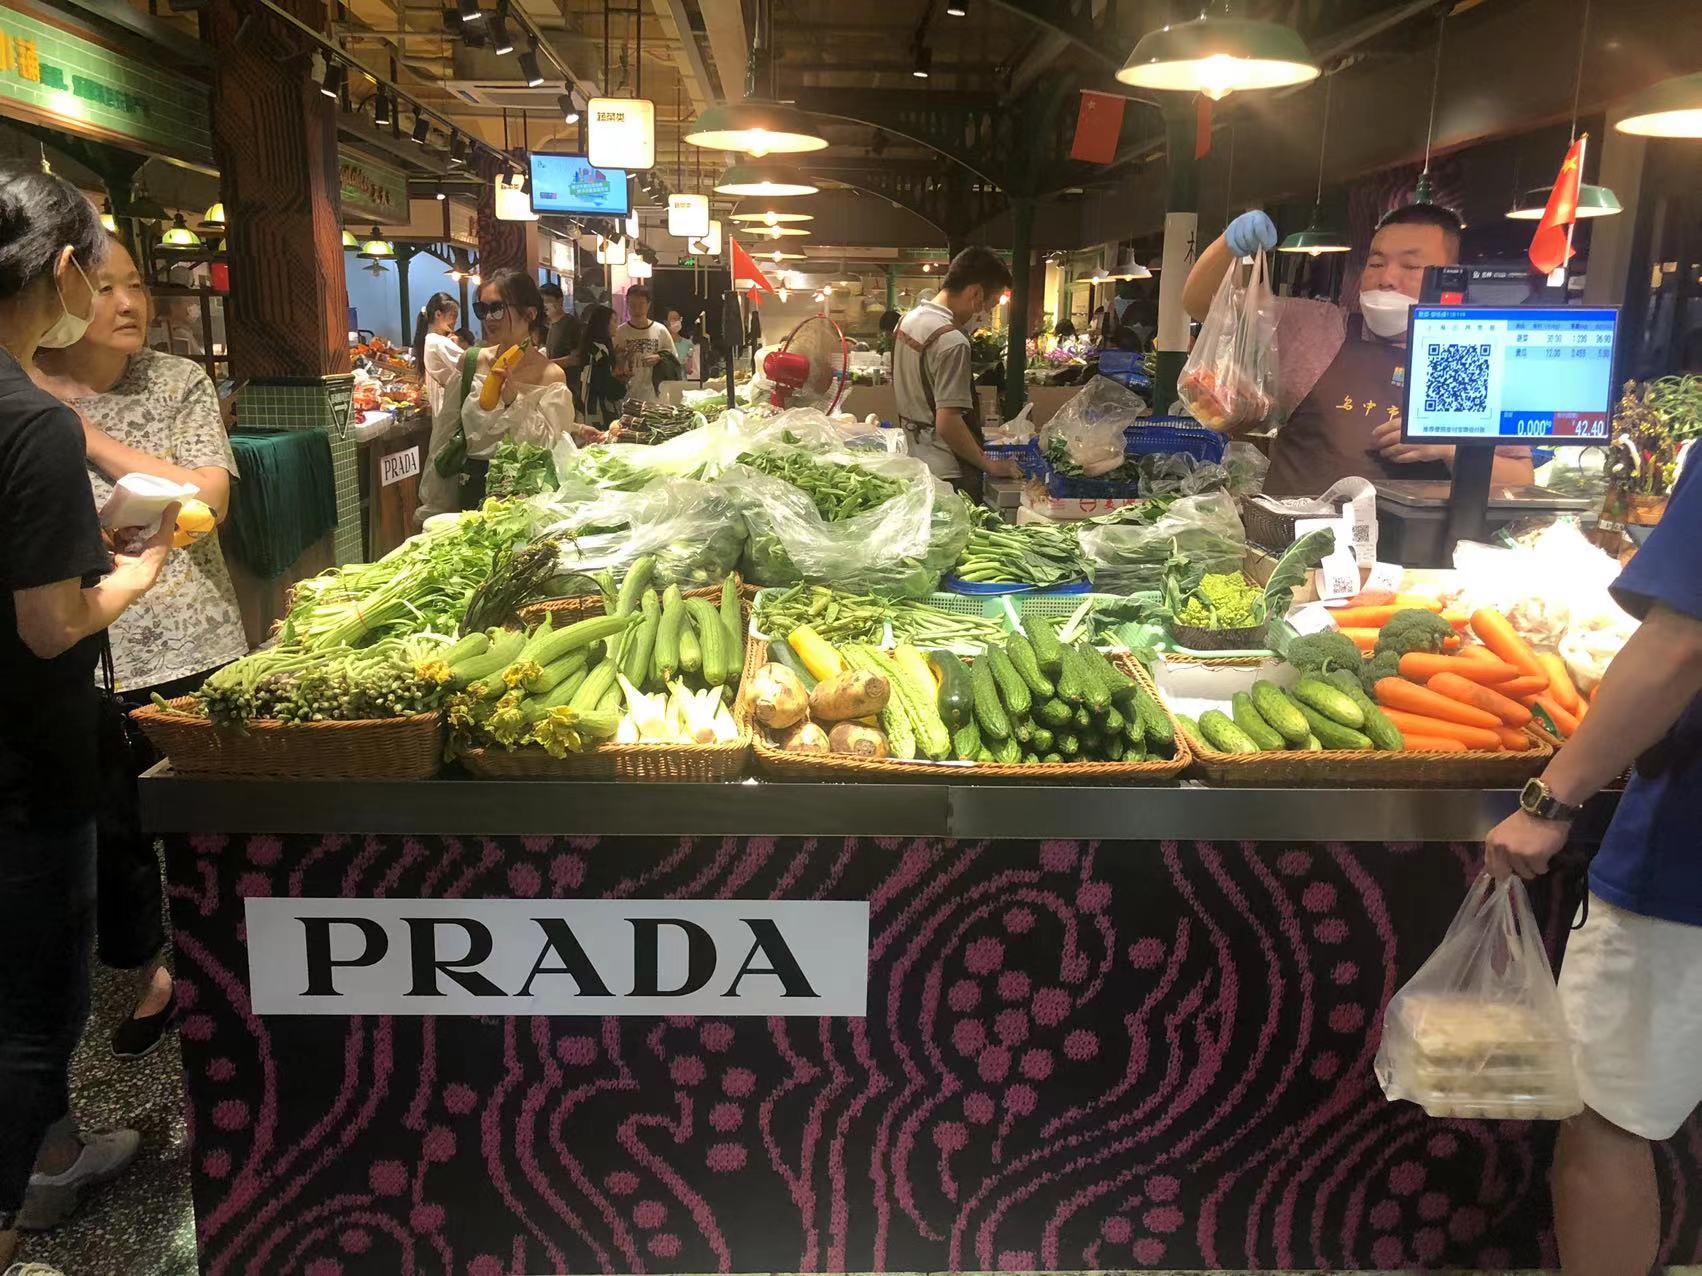 Prada takes over market in Shanghai - Chang Che